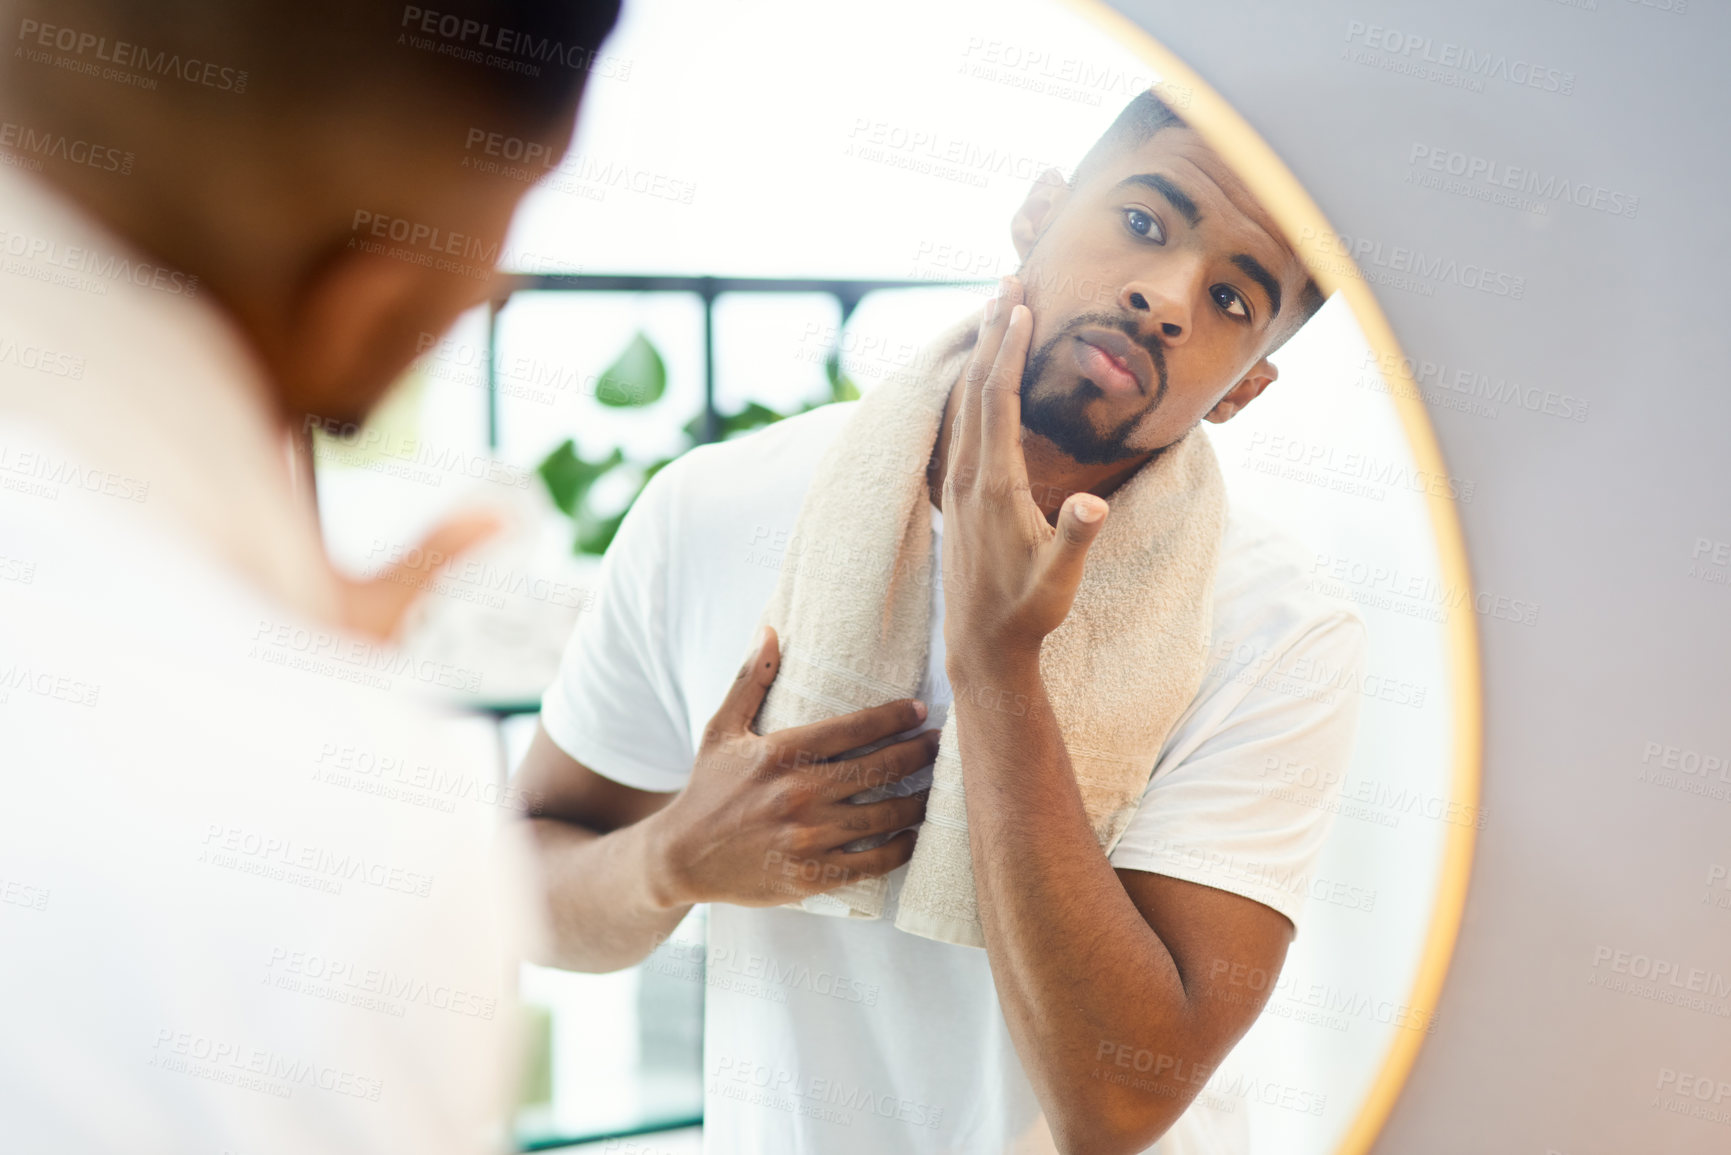 Buy stock photo Shot of a focused young man examining his face in the bathroom mirror